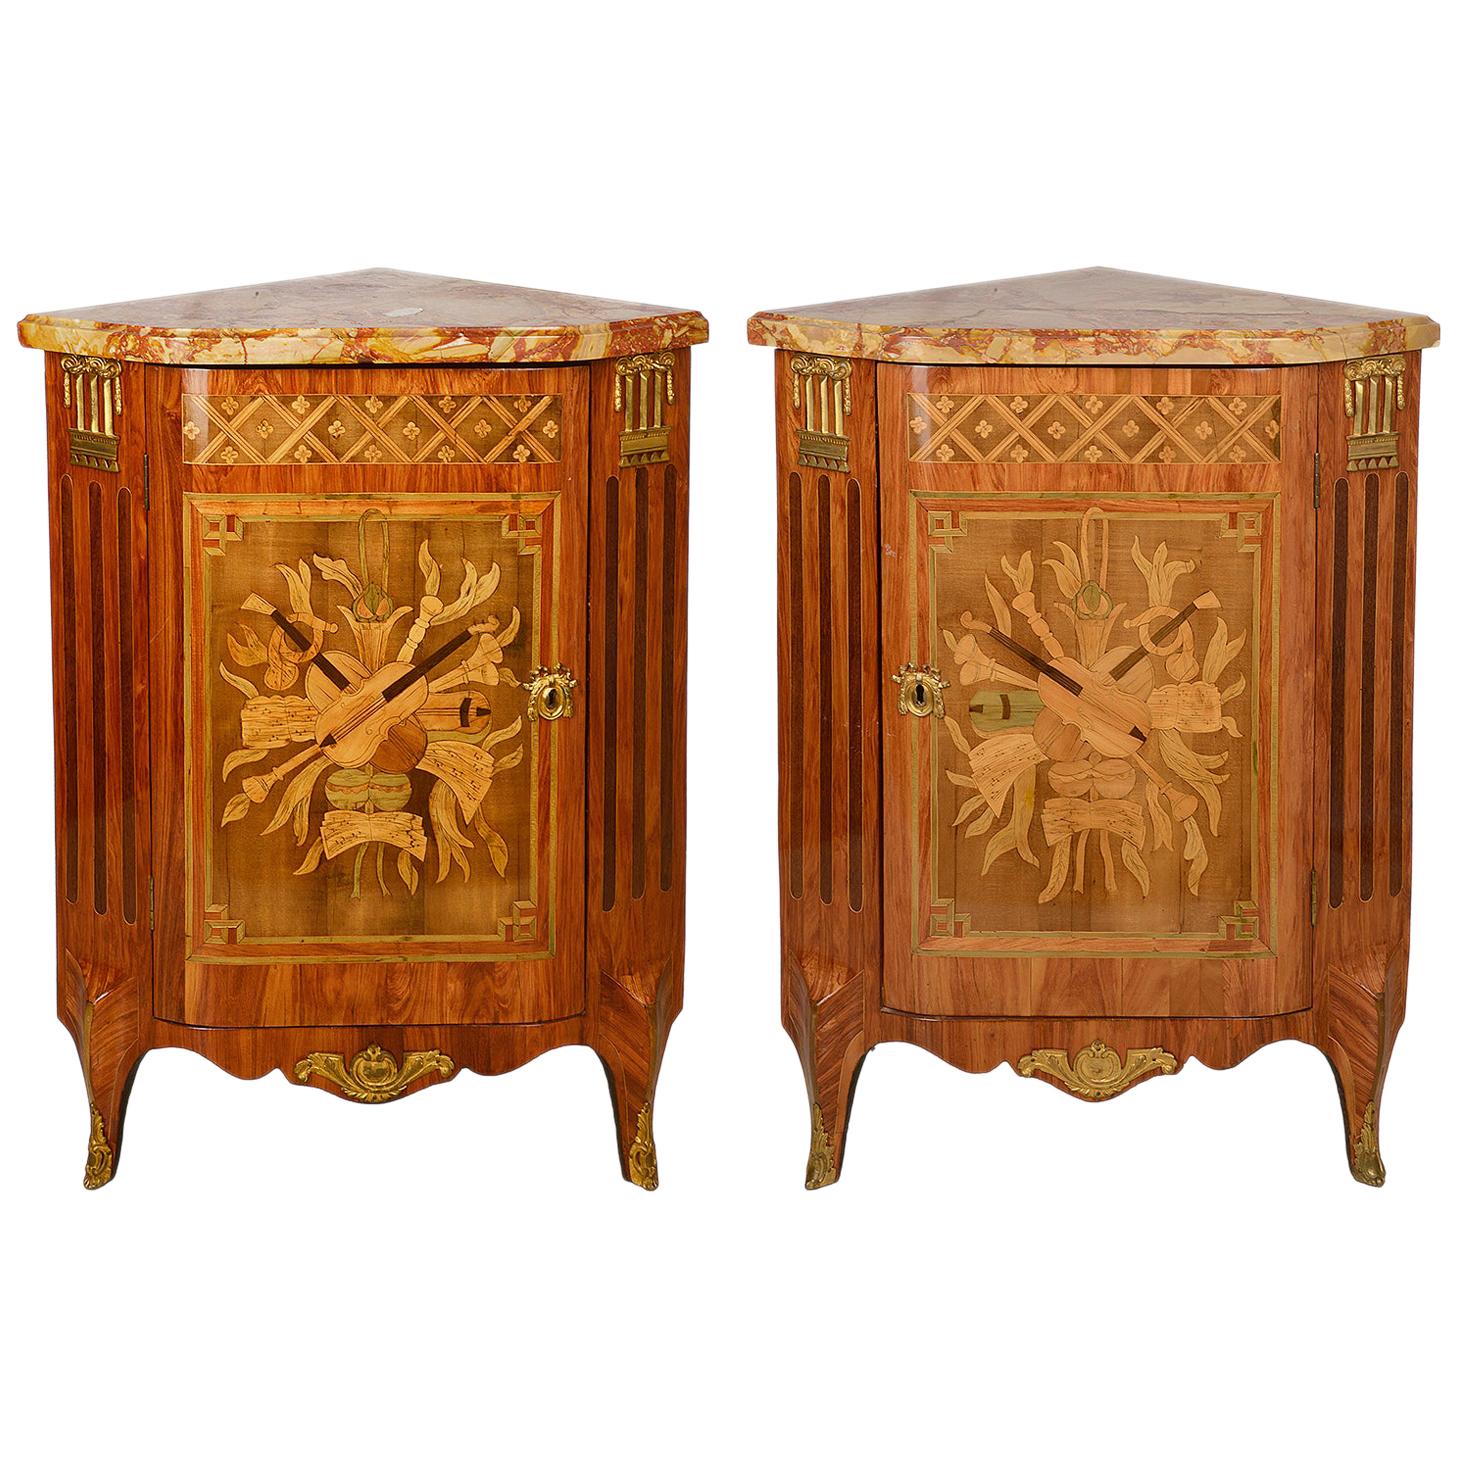 Pair of 18th Century Style French Corner Cabinets